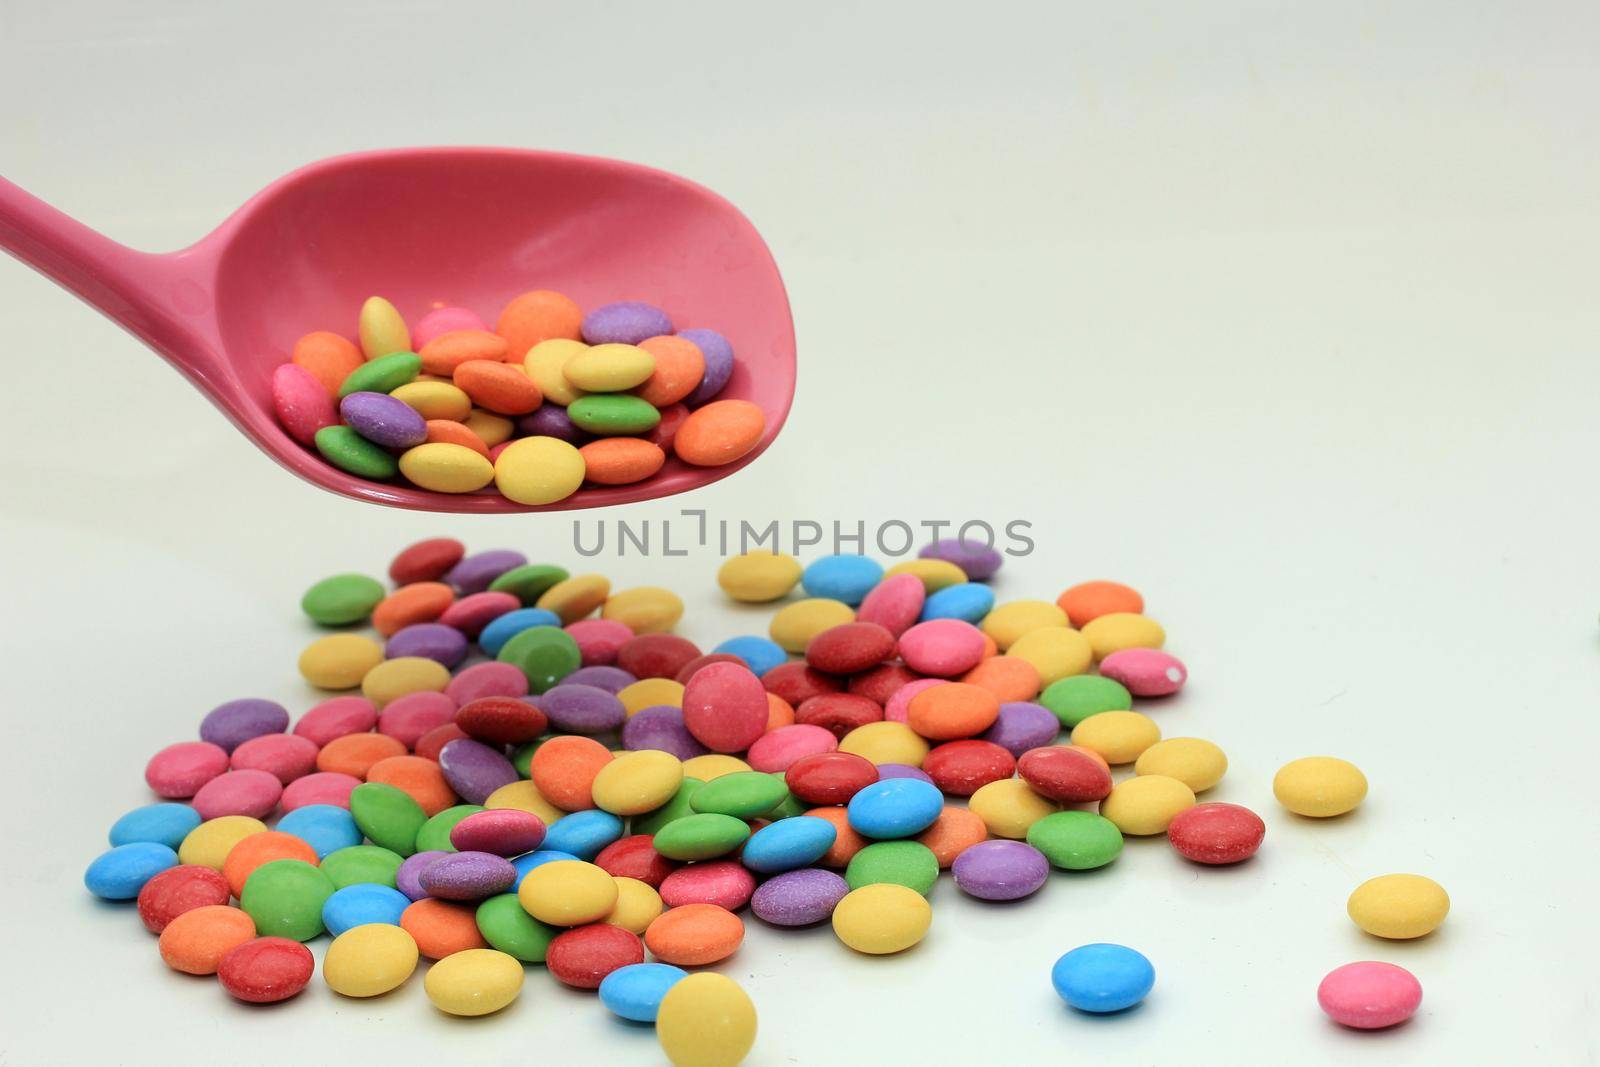 Chocolate filled candies in various bright colors by studioportosabbia